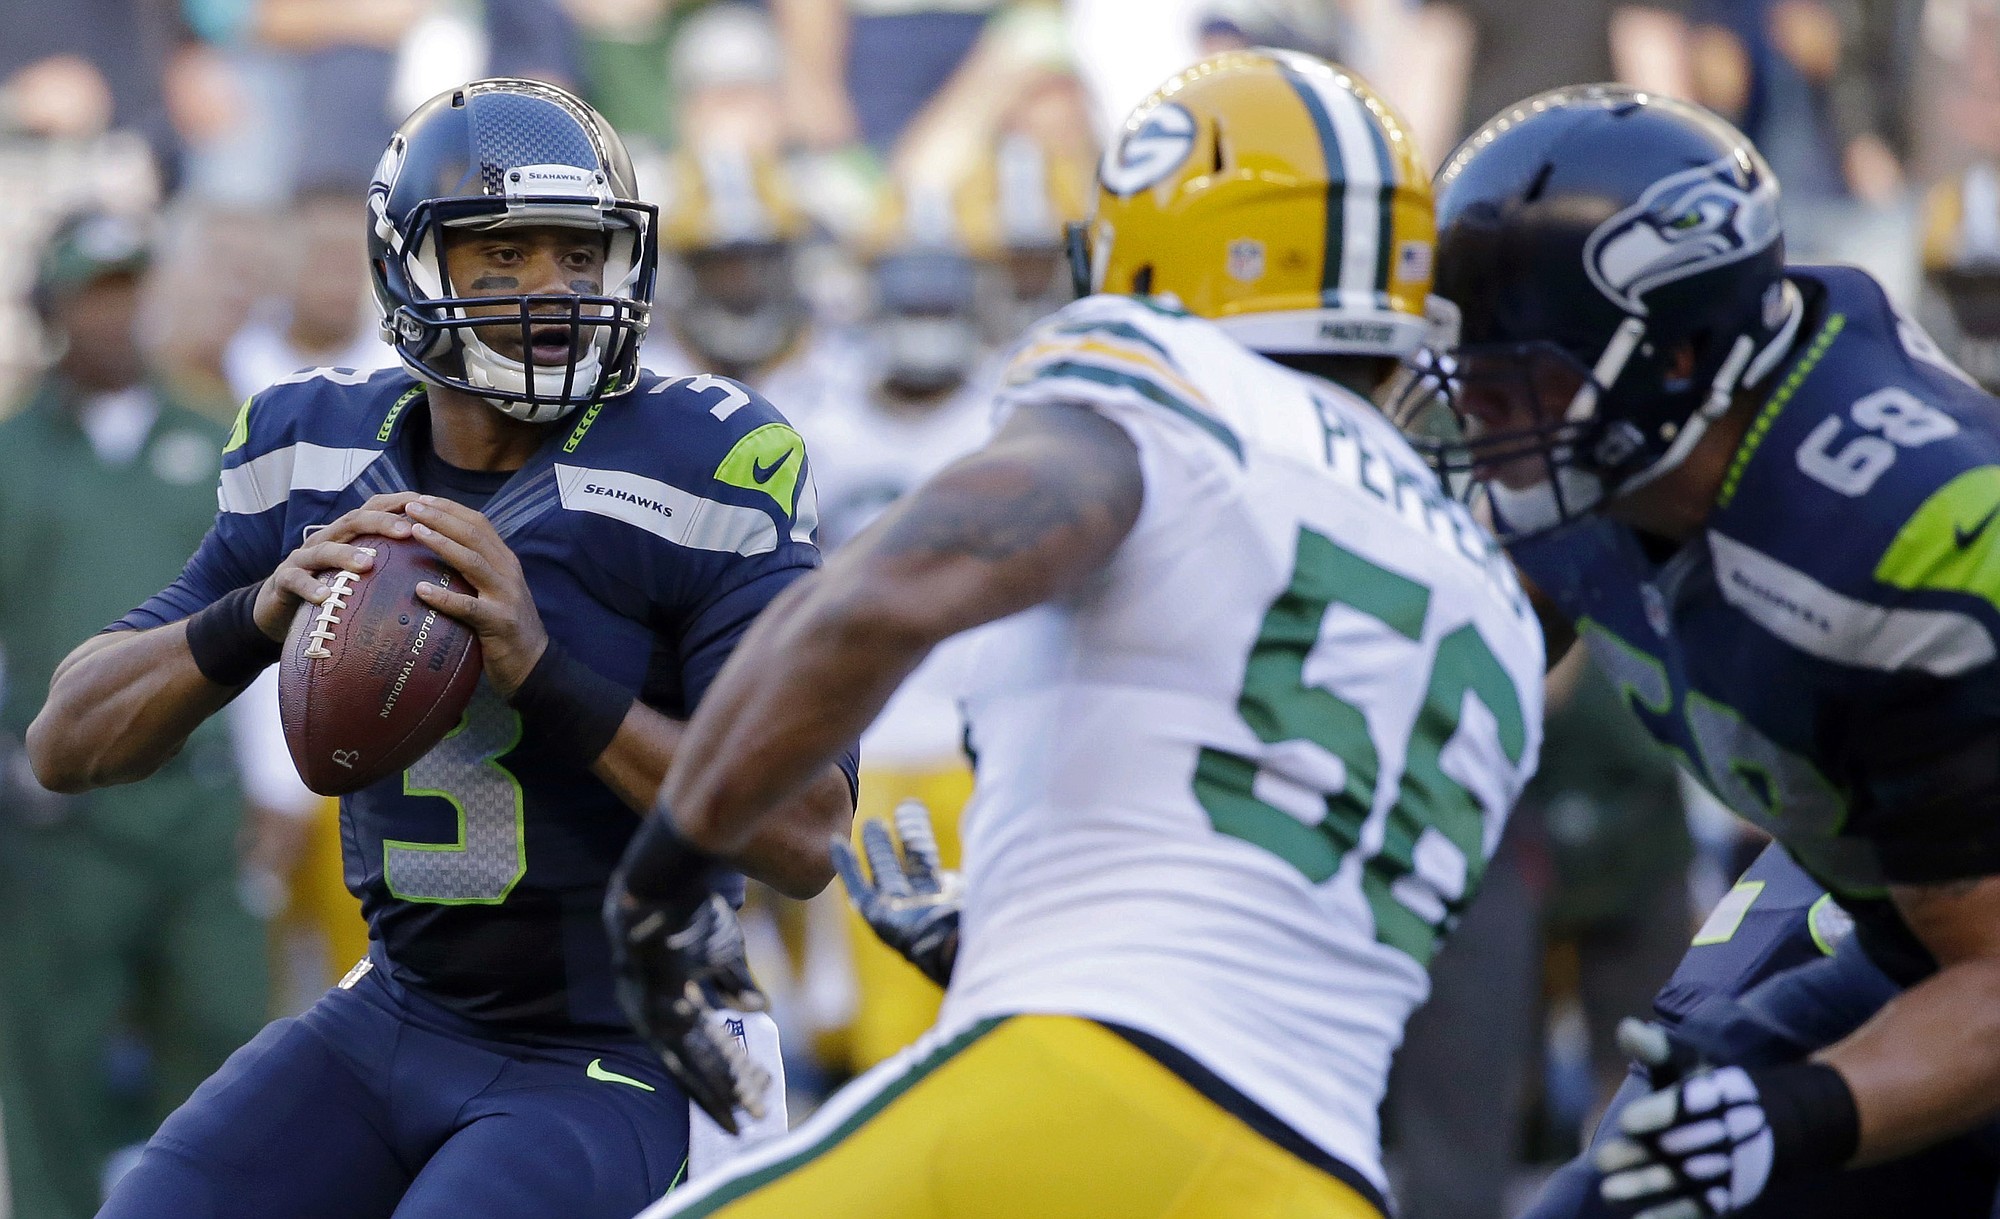 No. 4 - Seattle must have Russell Wilson keep his playoff form. The Seahawks quarterback has played his best in the biggest games. Last week's playoff win was his best game of the season by passer rating (149.2), as he completed 15 of 22 passes for 268 yards, three touchdowns and no interceptions.